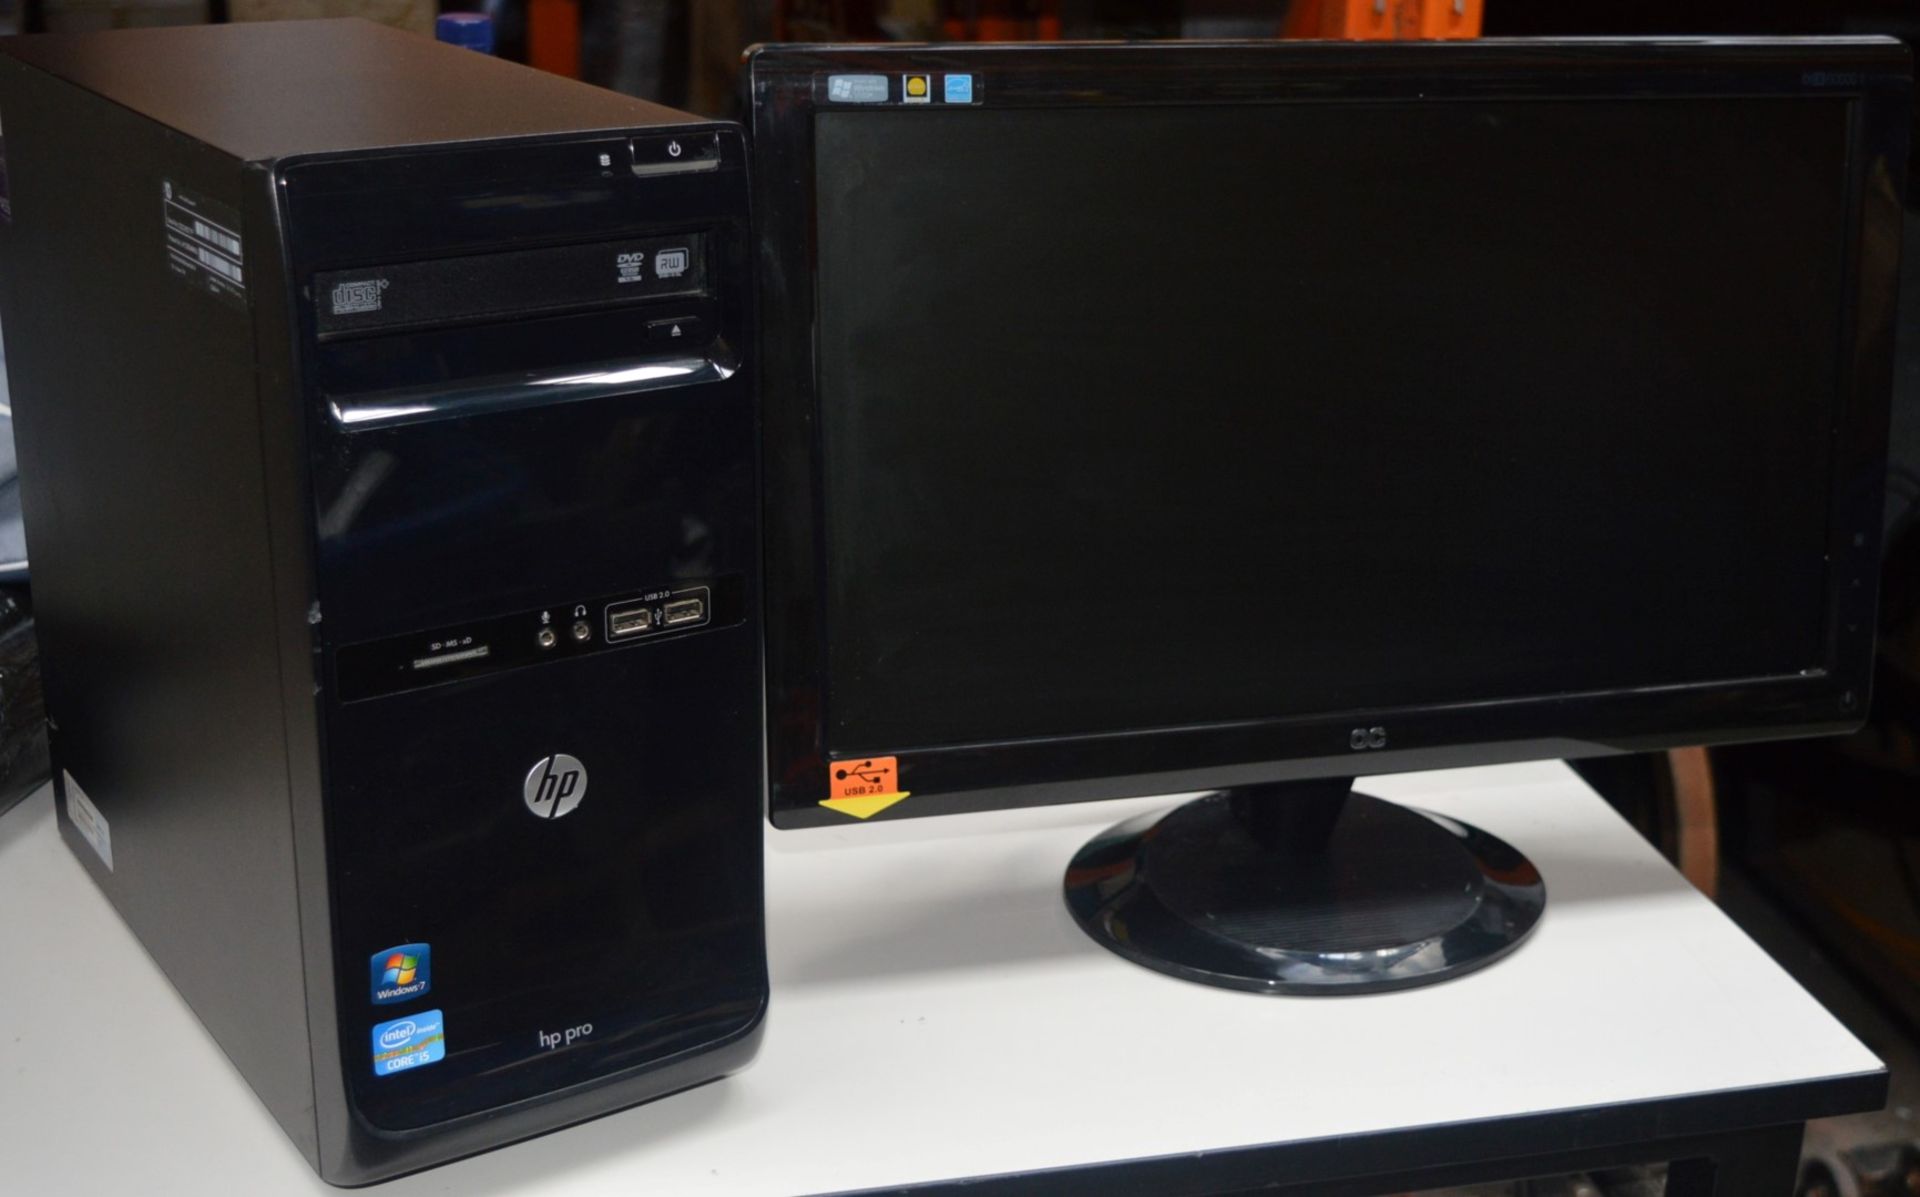 1 x HP Pro Desktop Computer System With Widescreen Monitor - Intel Core i5-2400 3.1ghz Quad Core - Image 5 of 5